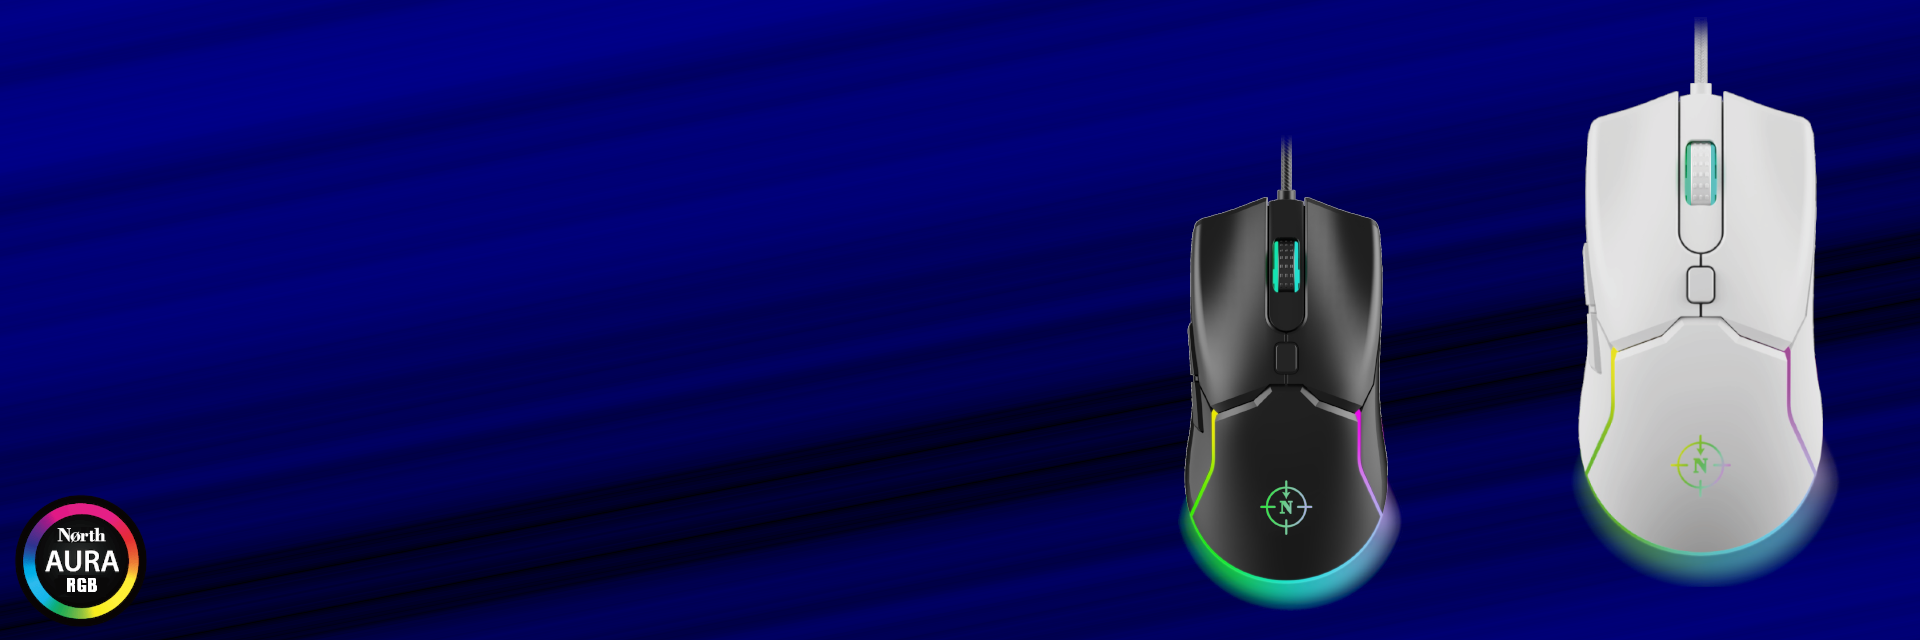 NAVIGATE YOUR GAMING JOURNEY WITH RGB BACKLIT GAMING MOUSE